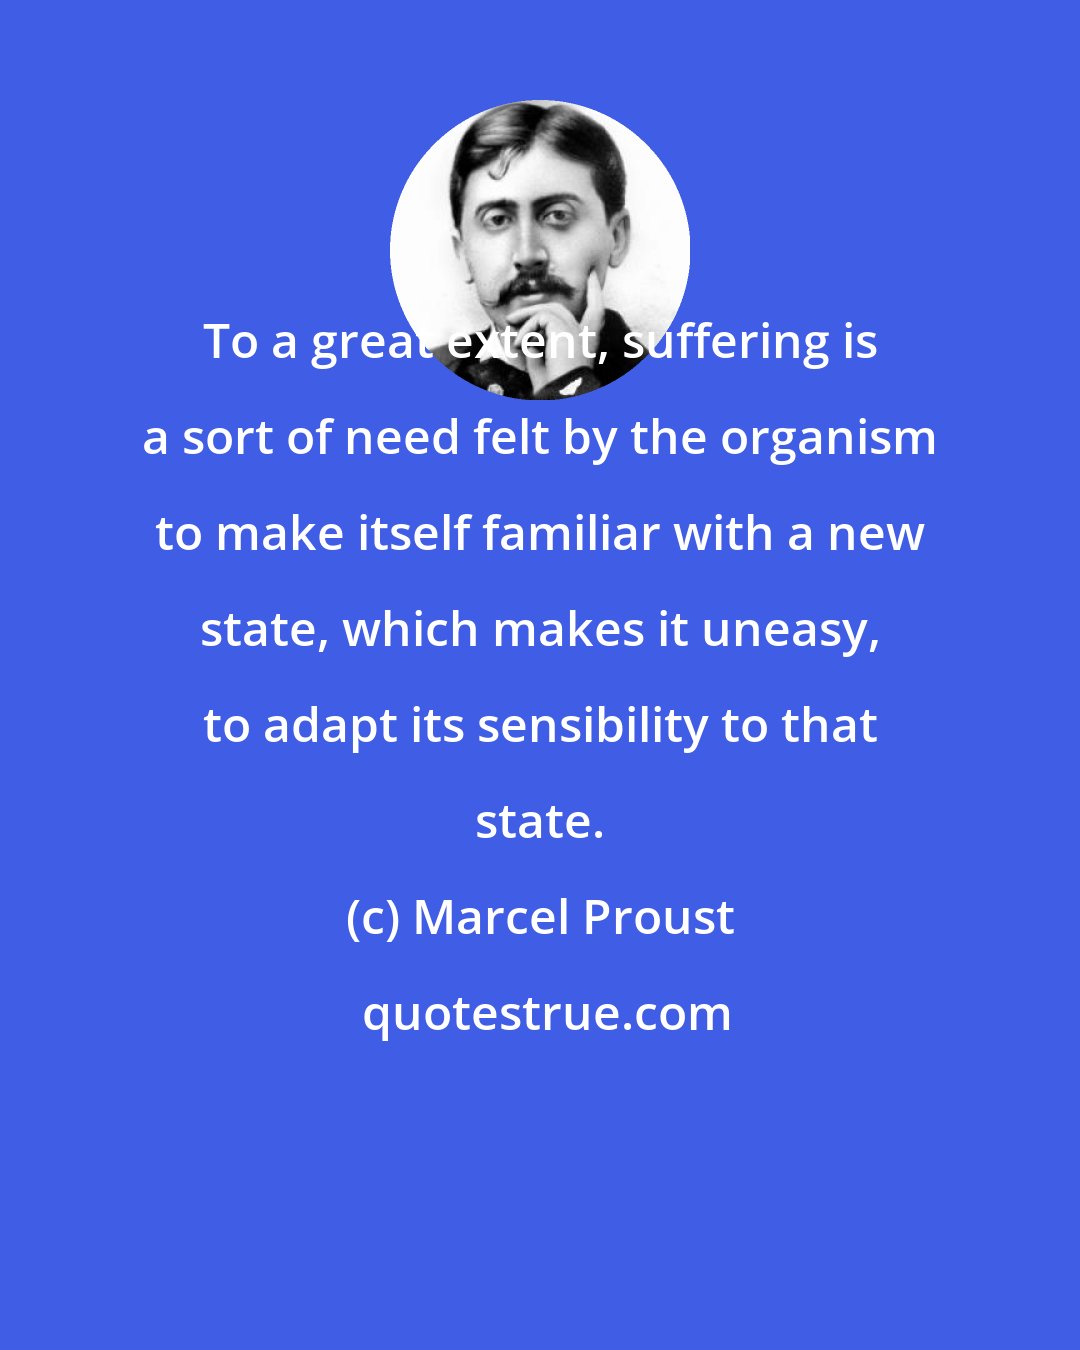 Marcel Proust: To a great extent, suffering is a sort of need felt by the organism to make itself familiar with a new state, which makes it uneasy, to adapt its sensibility to that state.